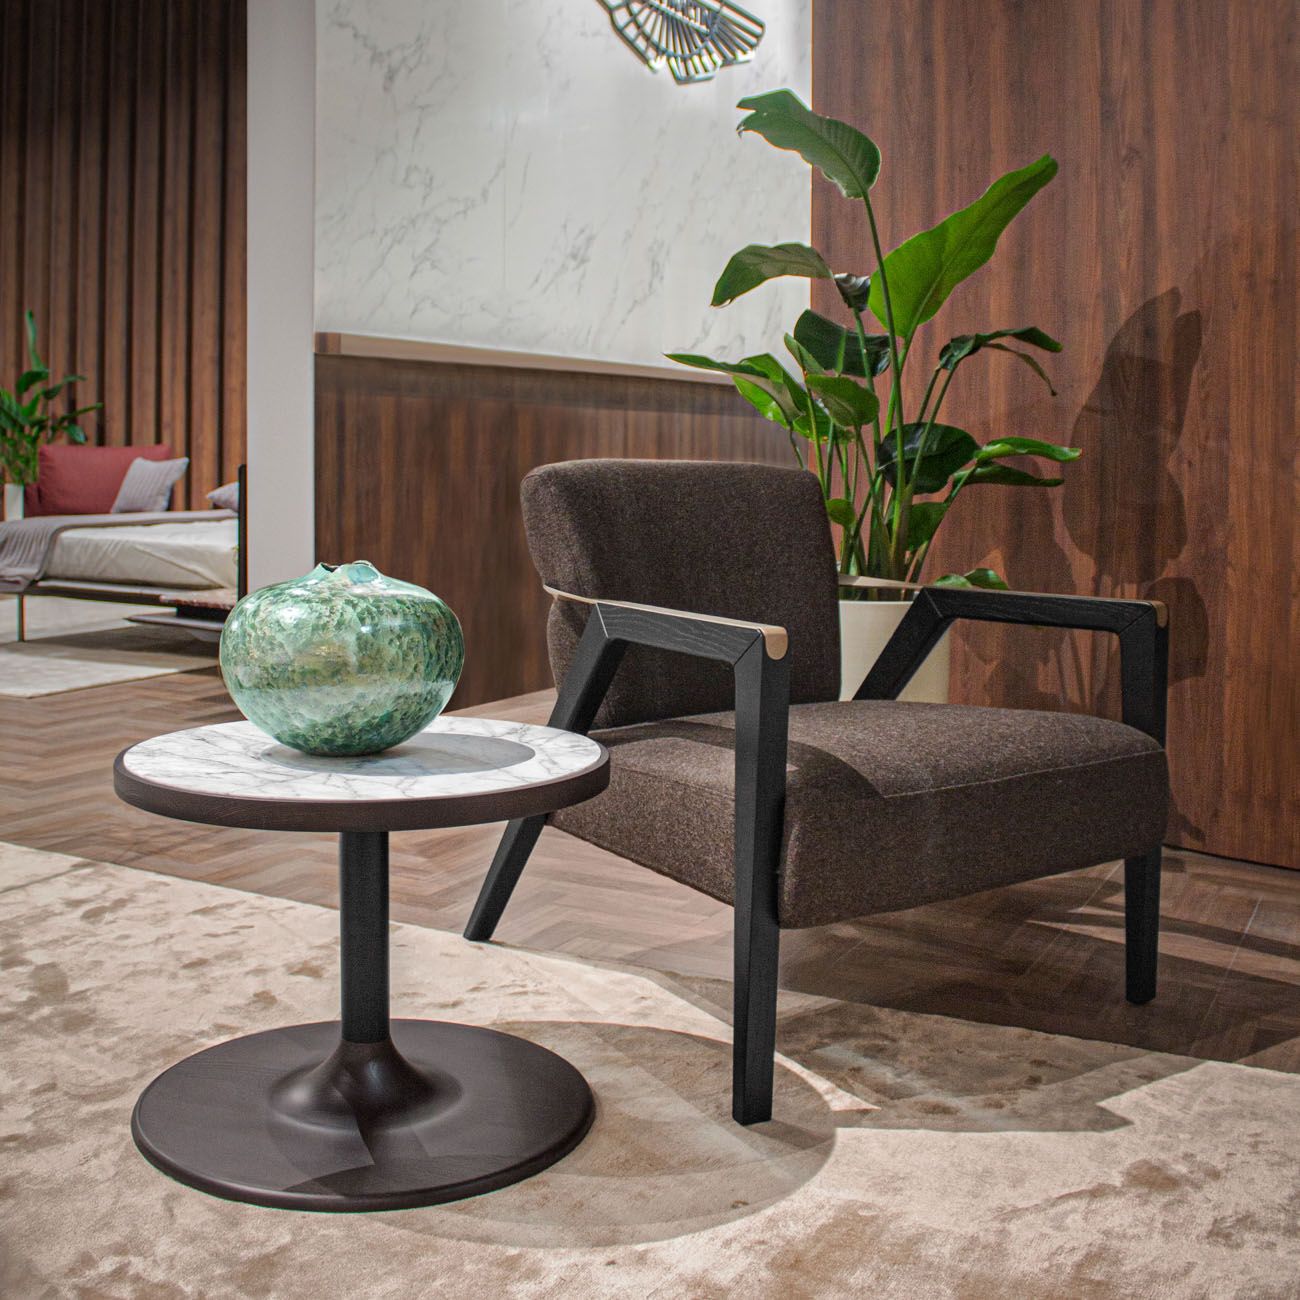 ASTON MARTIN HOME | V212/XL Wood and Marble Side Table - $9029.00